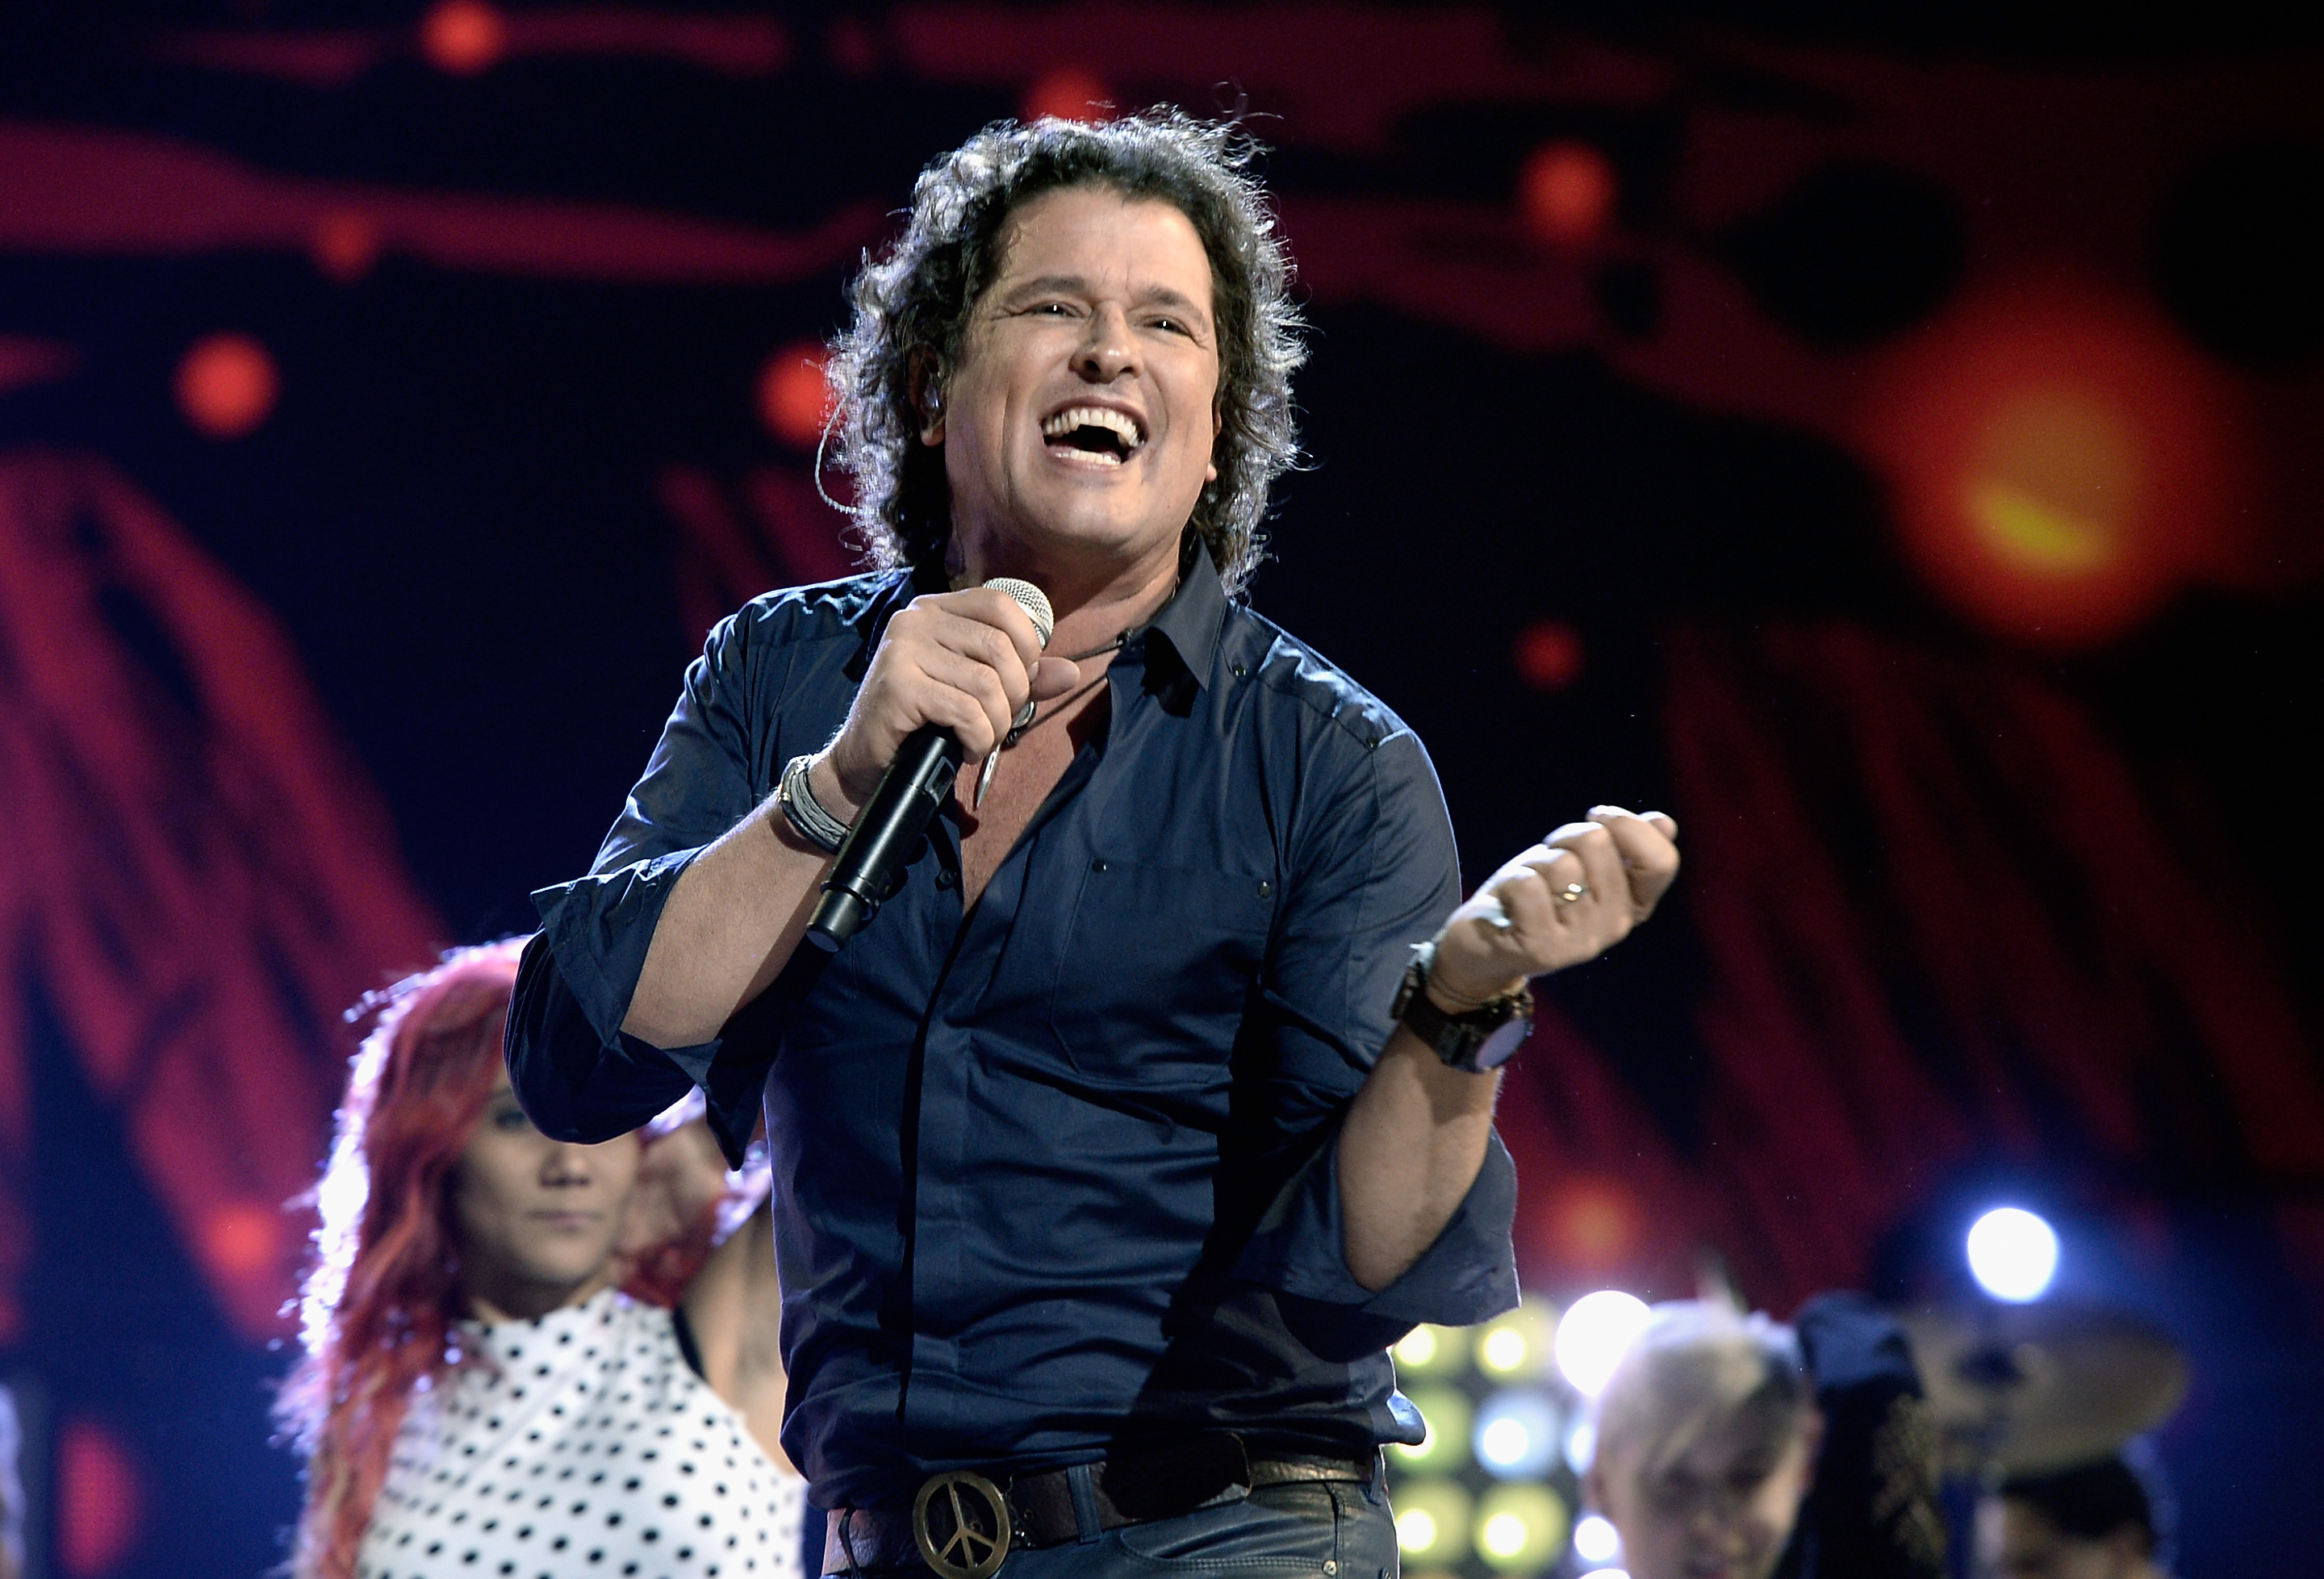 LAS VEGAS, NV - NOVEMBER 19: Singer Carlos Vives performs onstage during rehearsals for the 14th annual Latin GRAMMY Awards at the Mandalay Bay Events Center on November 19, 2013 in Las Vegas, Nevada. (Photo by Kevin Winter/WireImage)